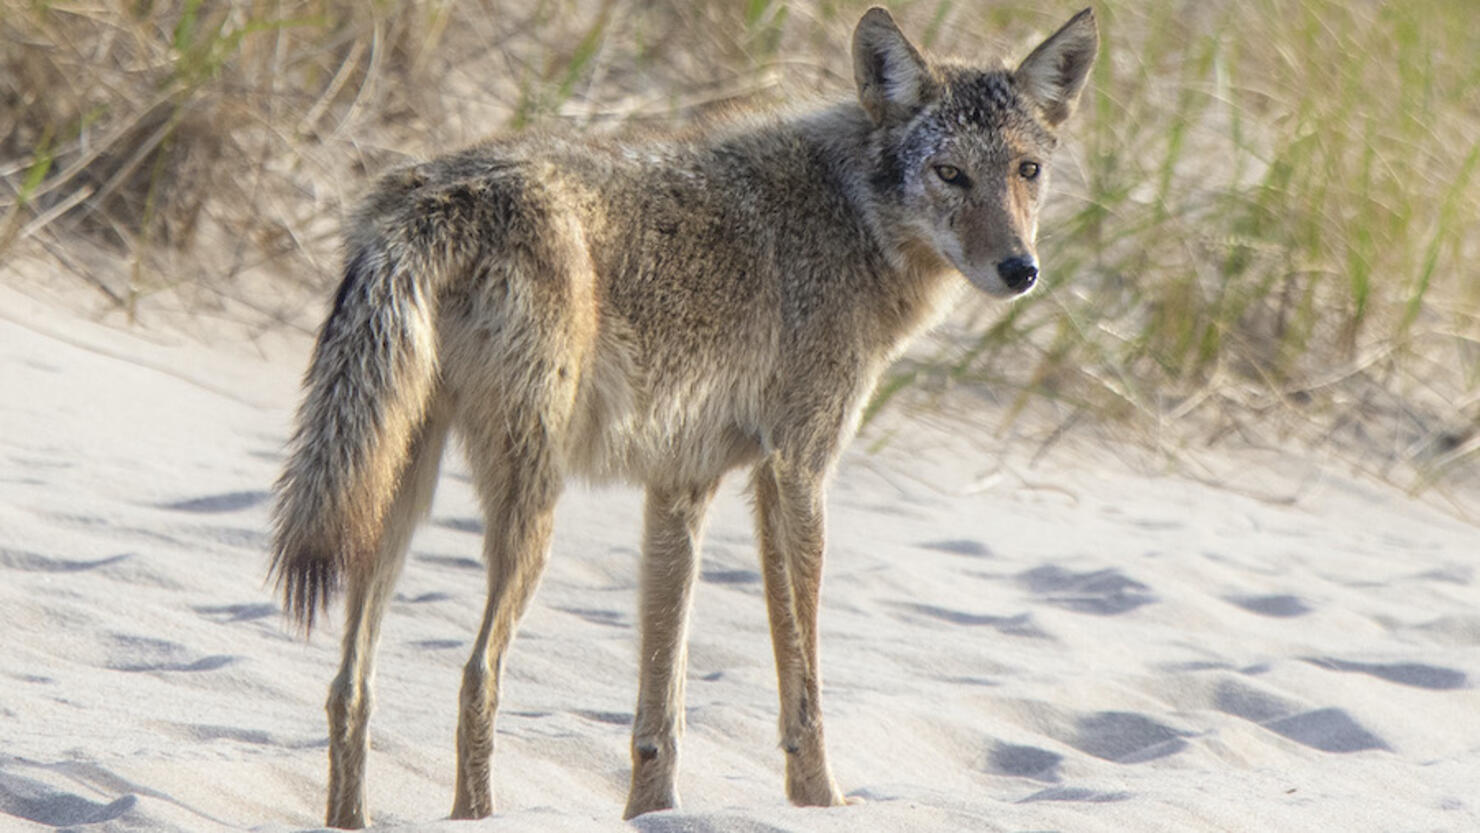 Ptown Coyote